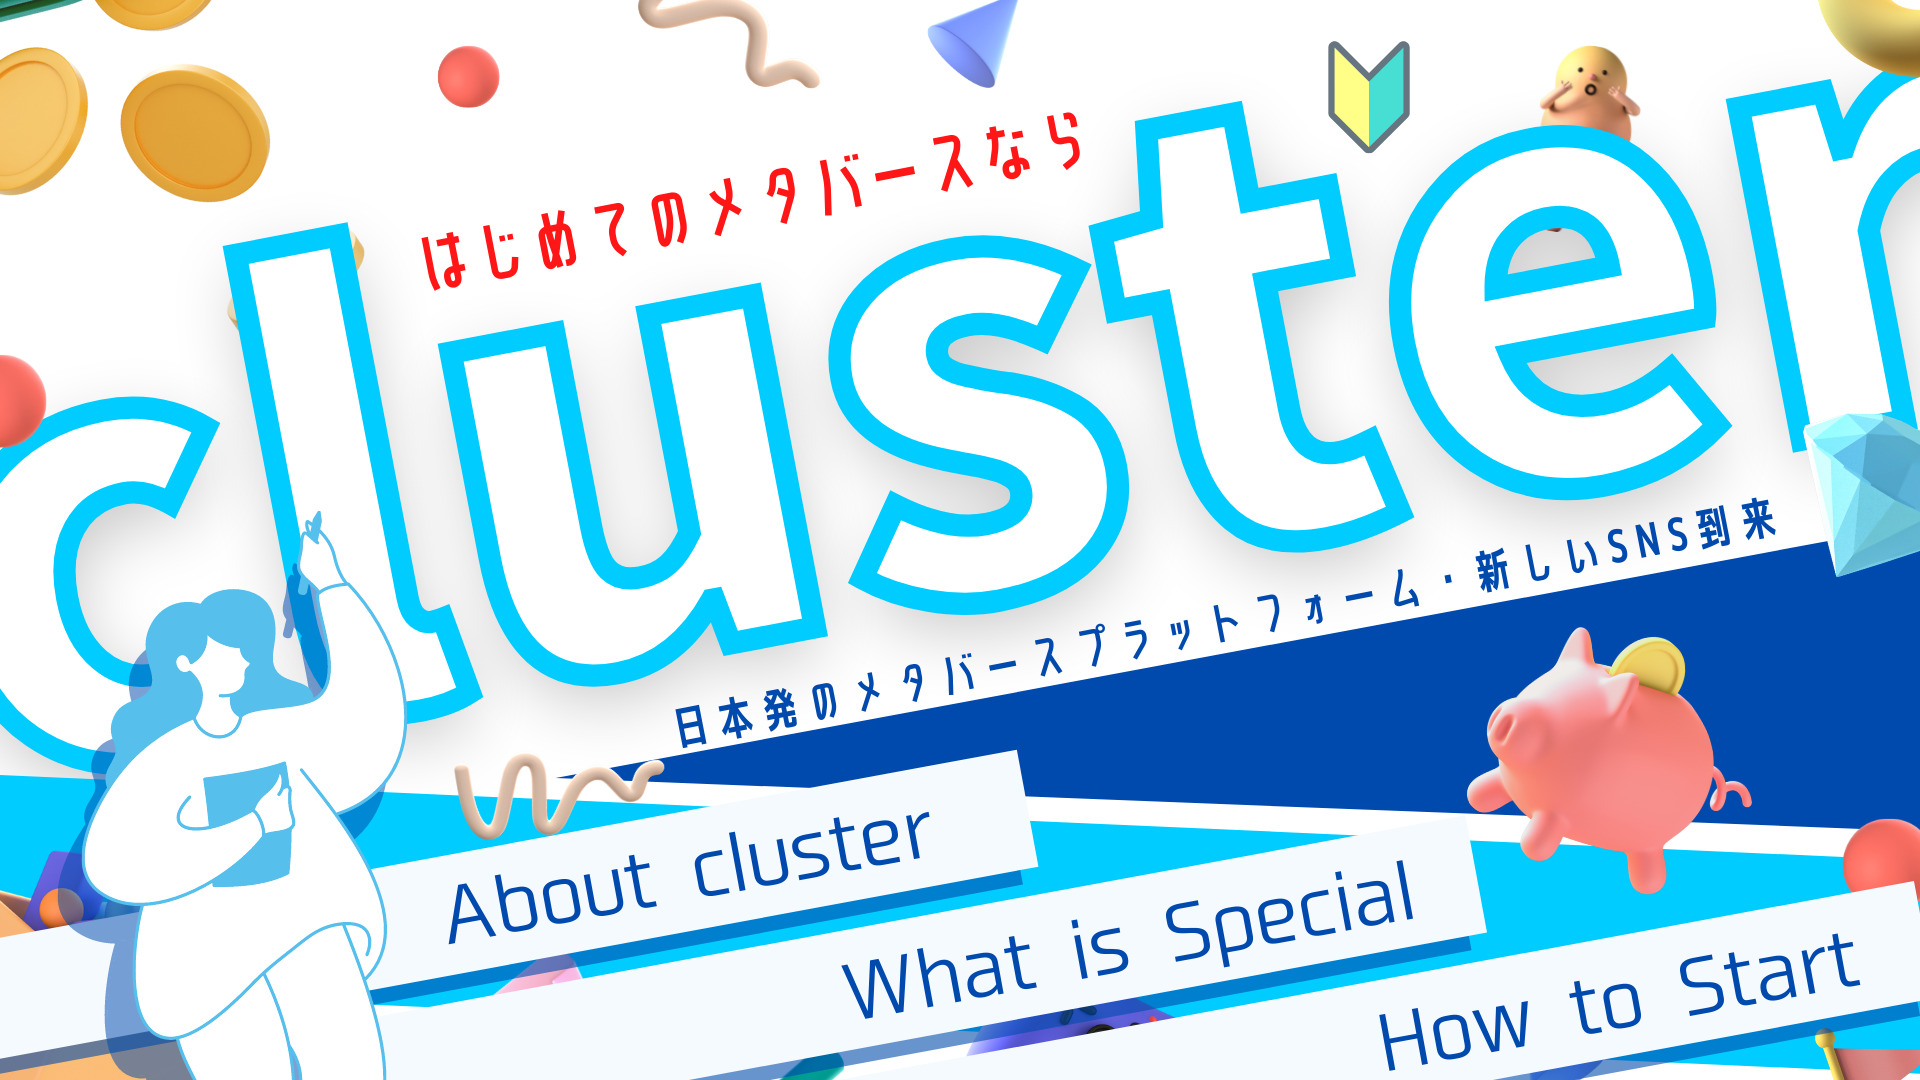 About cluster